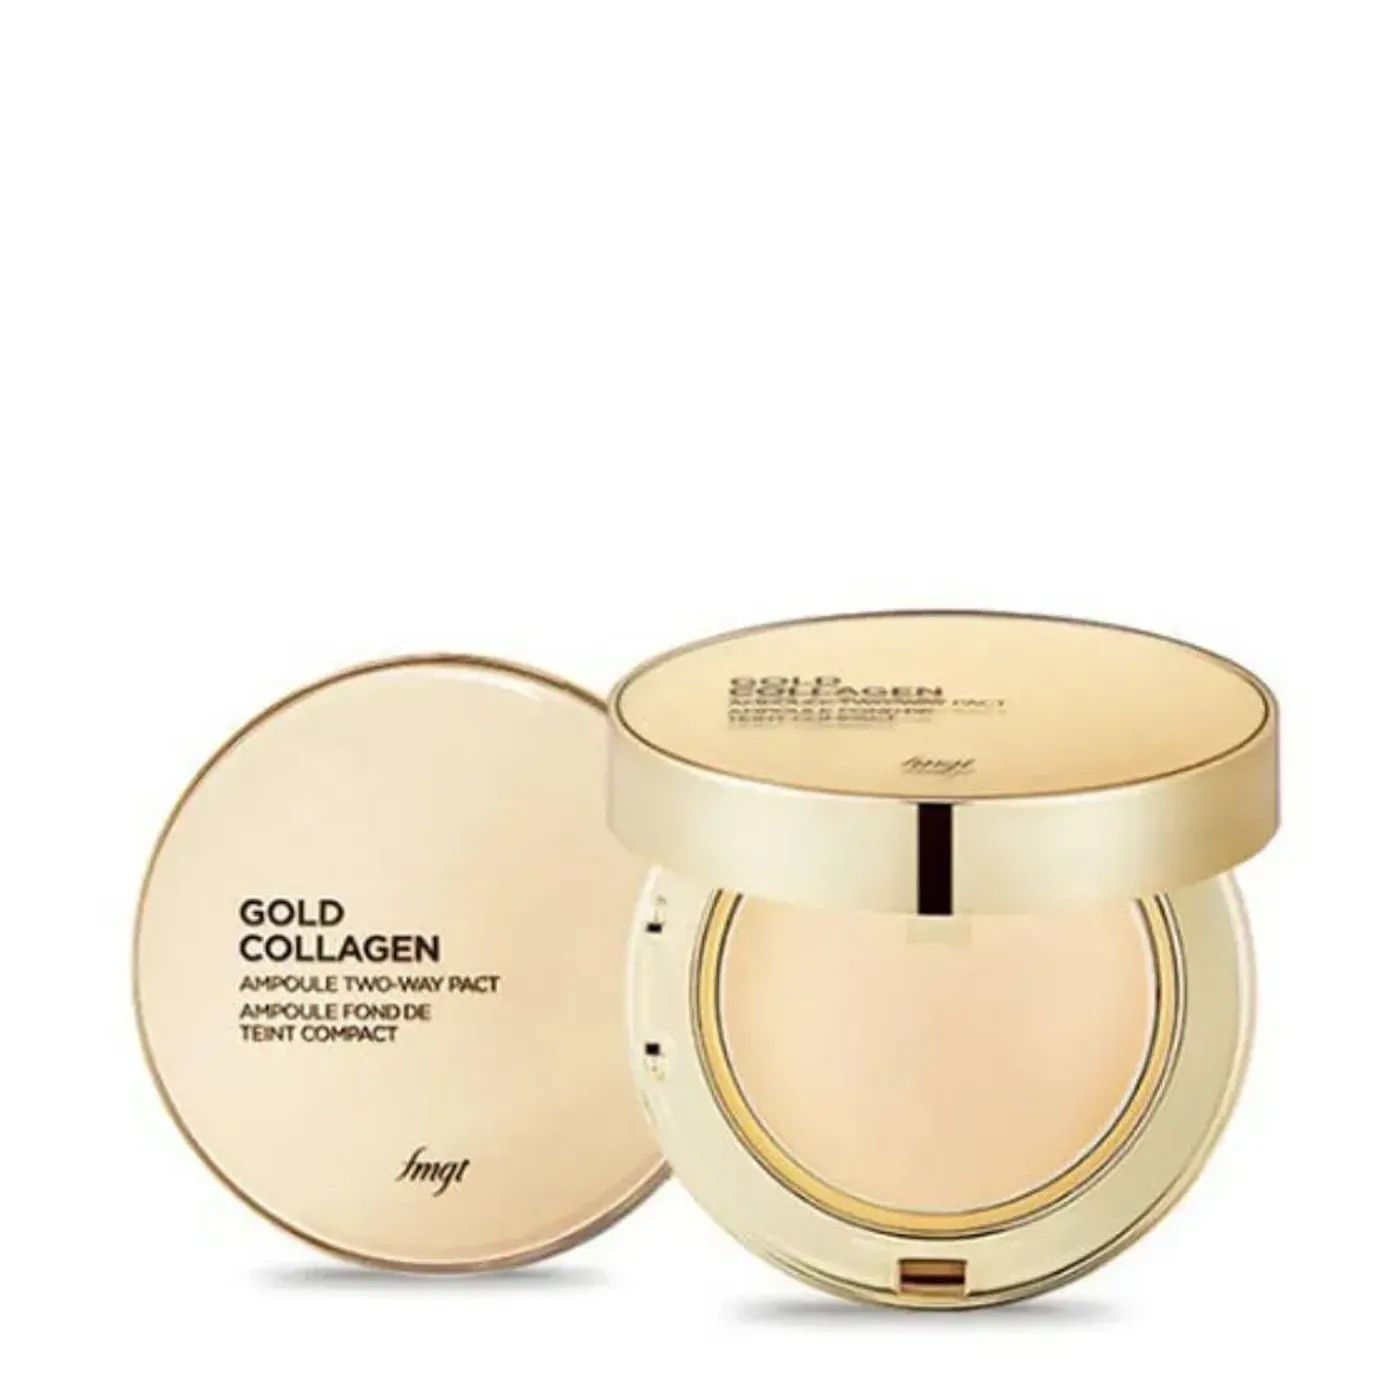  [FMGT] Phấn Nền Che Khuyết Điểm THE FACE SHOP Gold Collagen Ampoule Two-Way Pact Spf30 PA+++ V201 